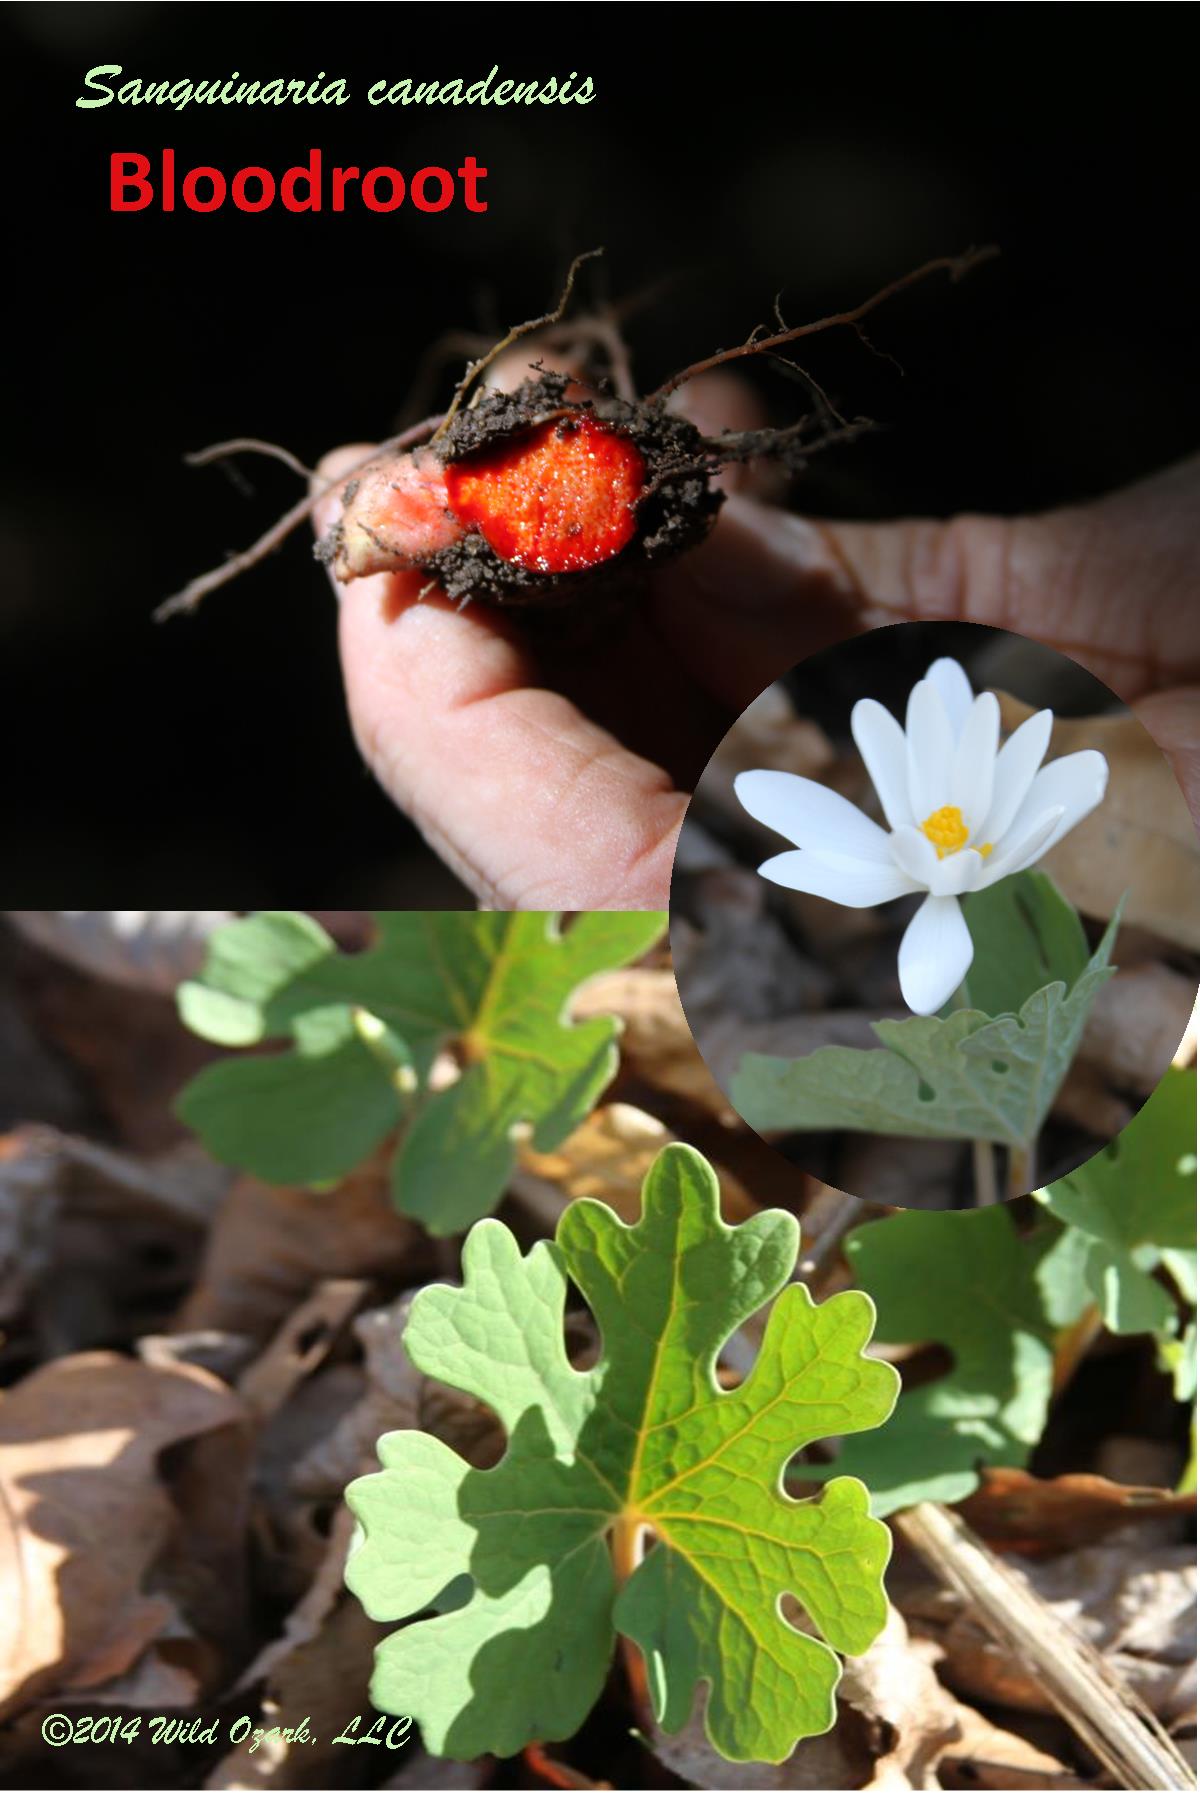 A poster of bloodroot showing the interesting features of this plant. It blooms in early April in the ginseng habitat.